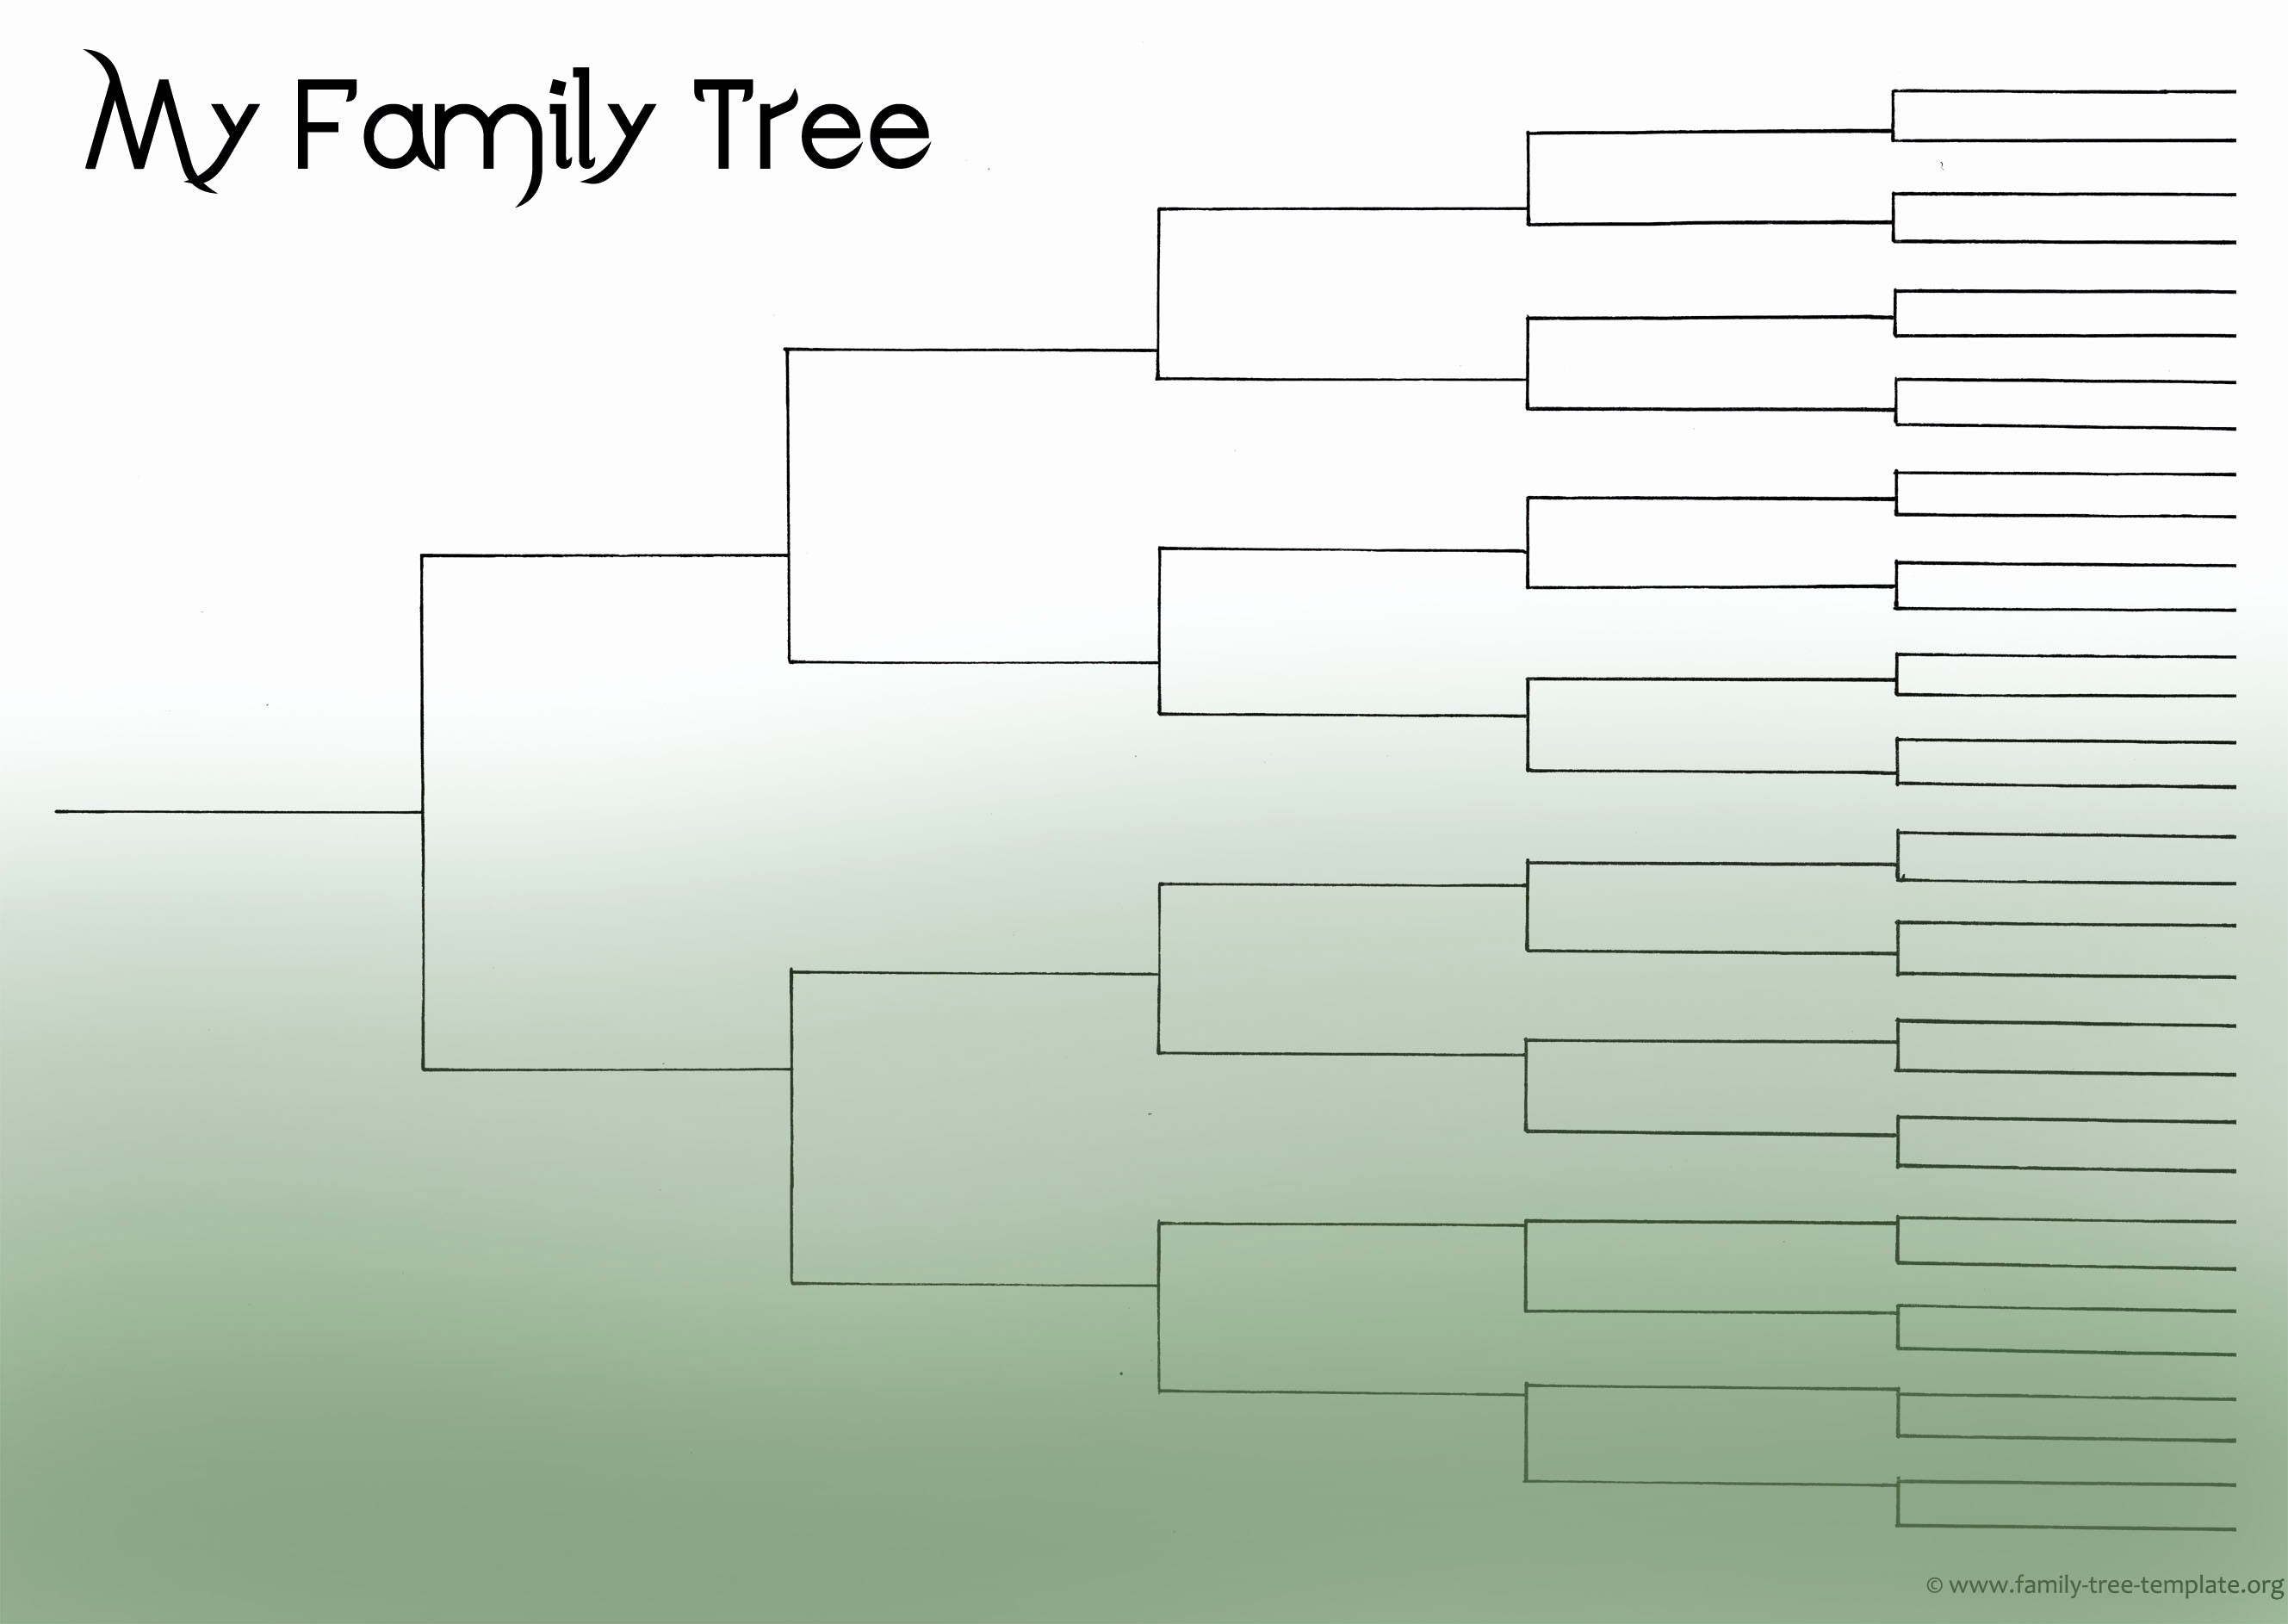 Family Tree Template 5 Generations Awesome 5 Generation Family Tree Outline Bamboodownunder